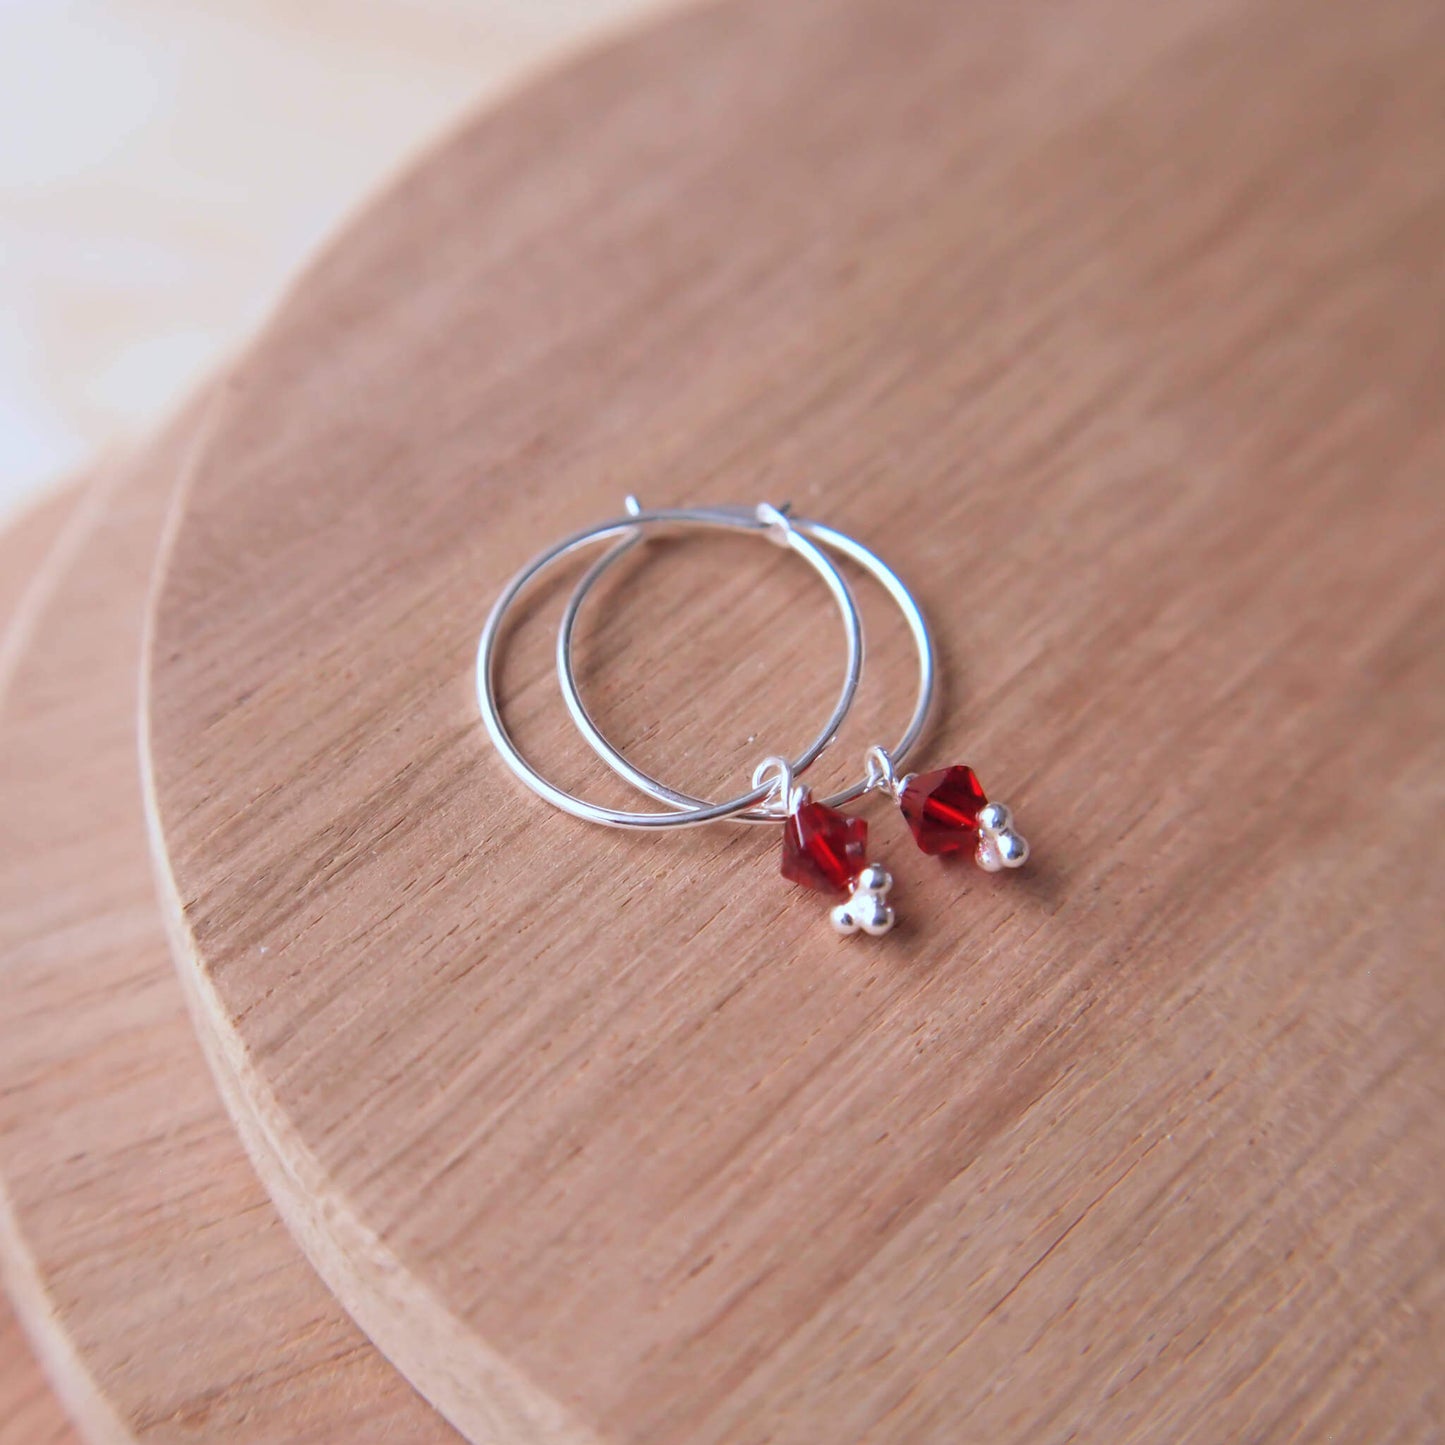 Simple Birthstone crystal hoops in garnet red. Boho style jewellery made from a thin sterling silver hoop with a single birthstone crystal for January. Made in a small studio in Scotland UK